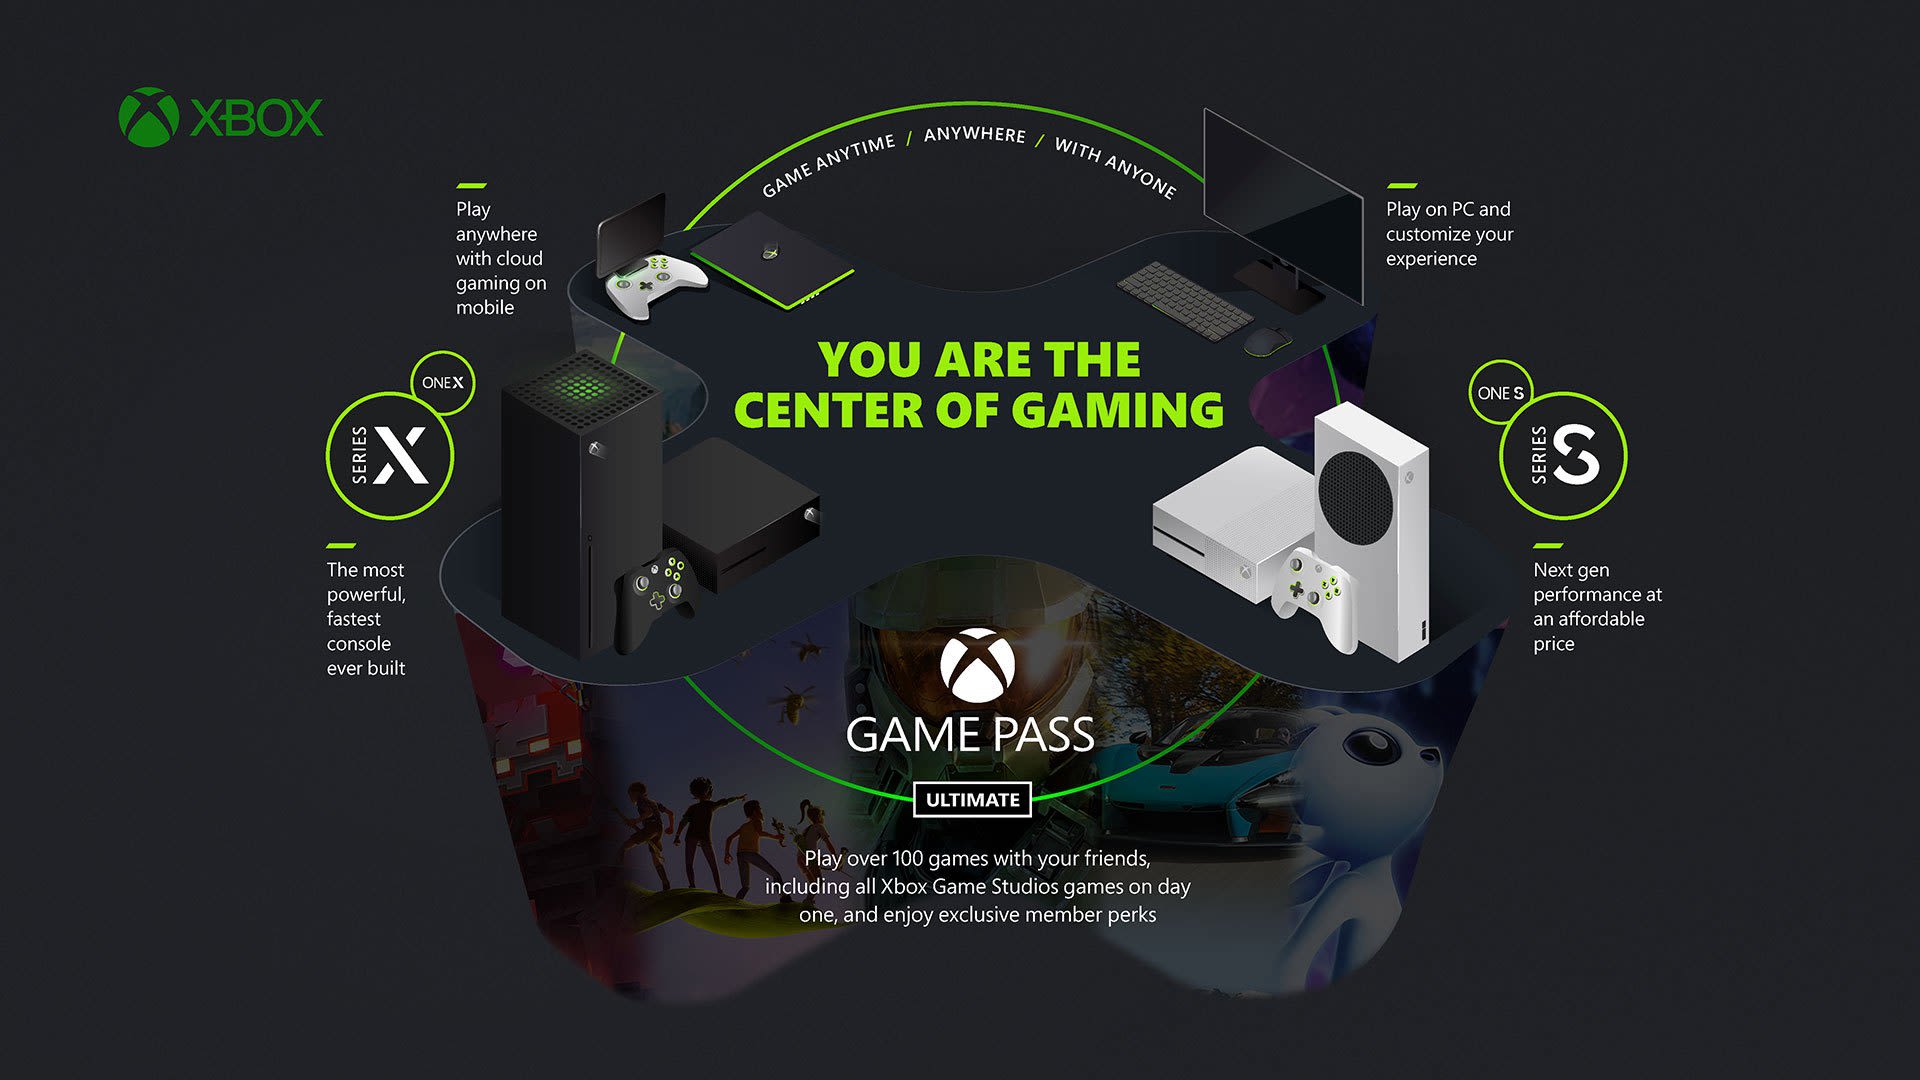 Xbox Game Pass for PC Is Now 'PC Game Pass